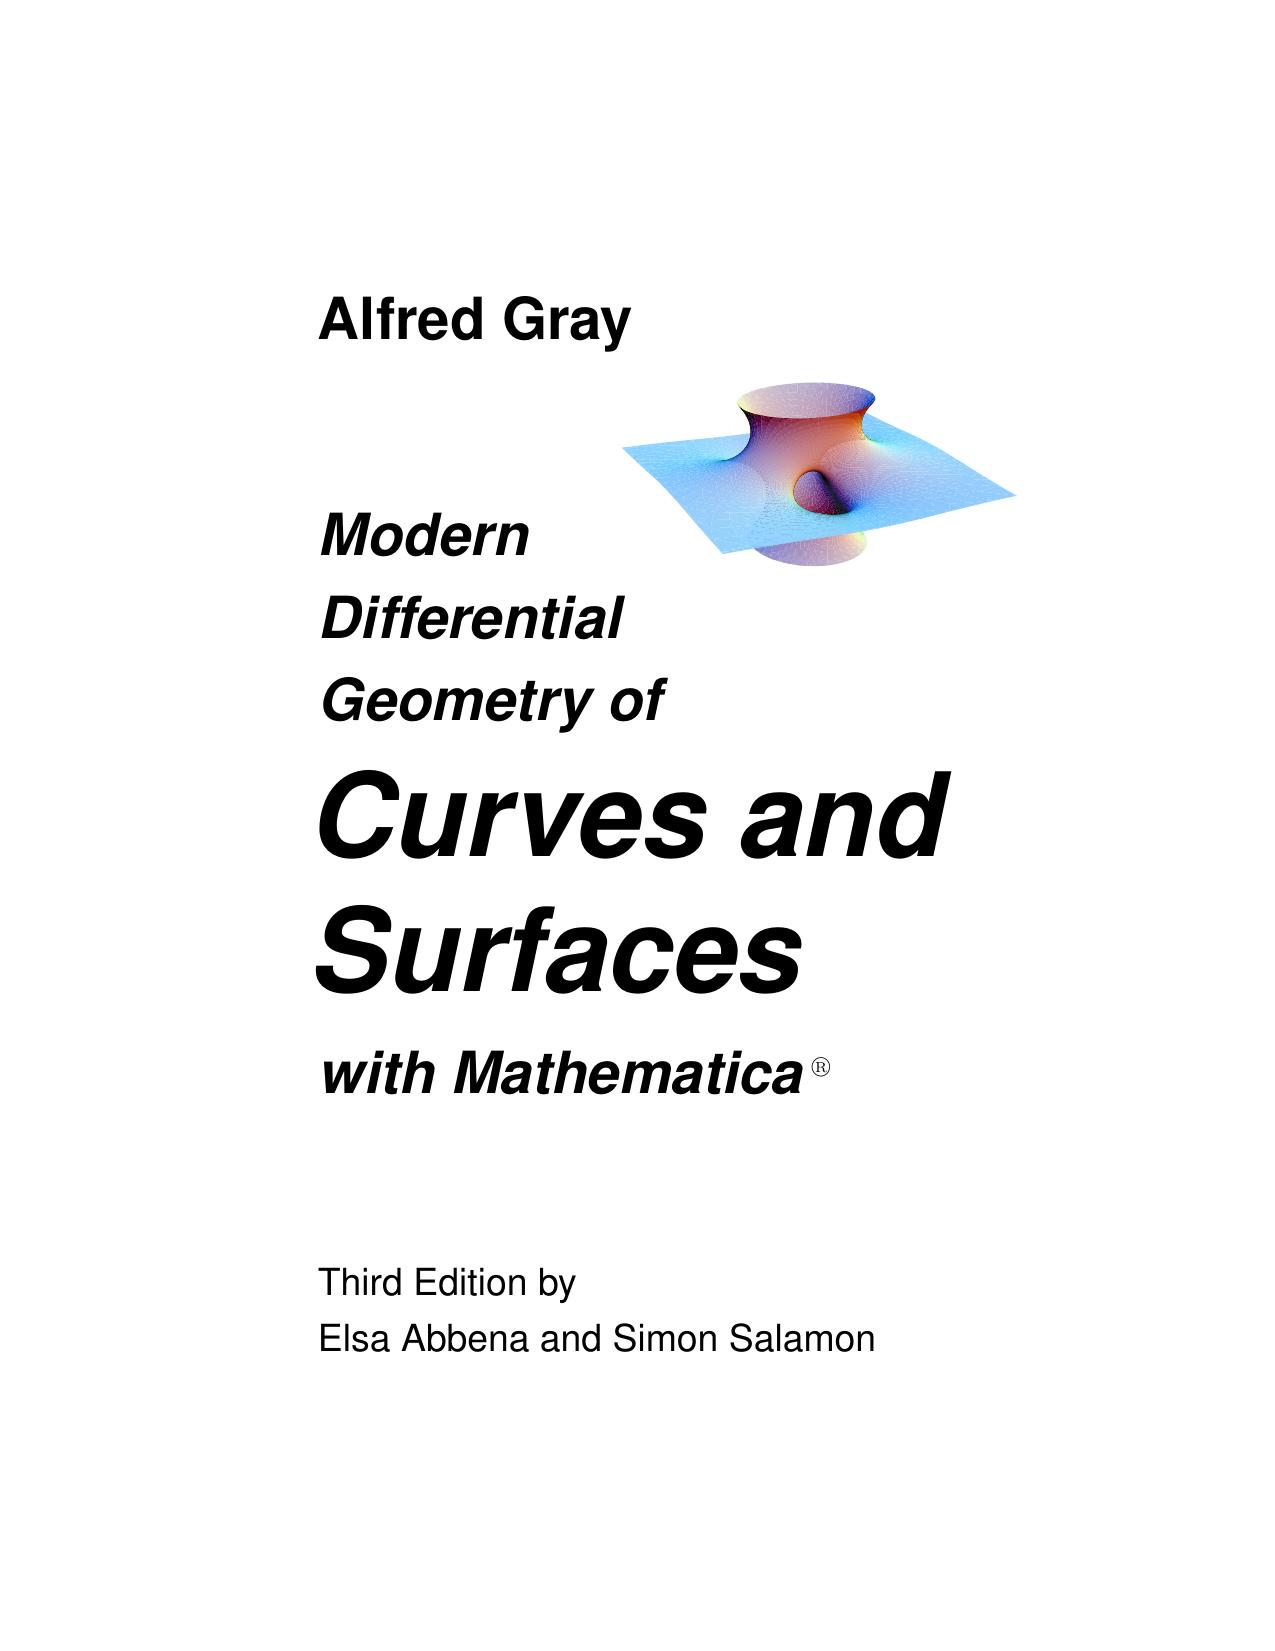 Modern Differential Geometry of Curves and Surfaces with Mathematica®, Third Edition